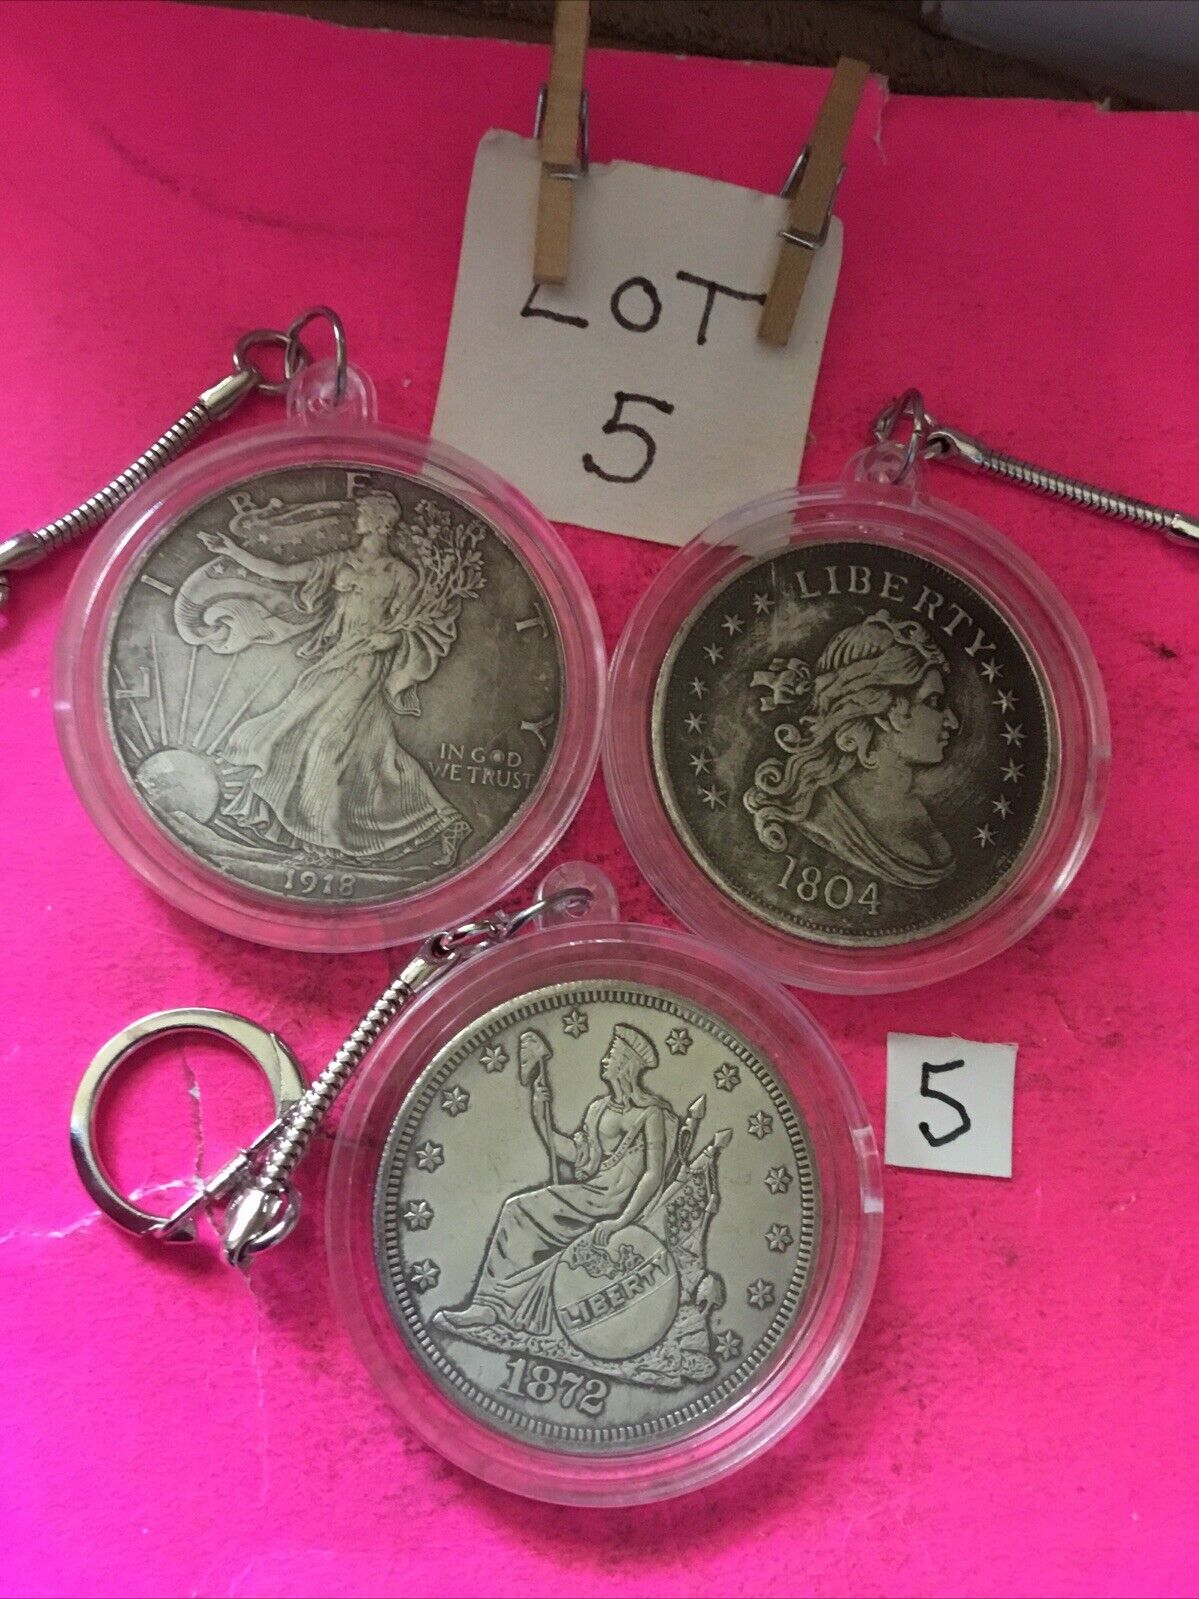 Set Lot 3 Coin Keychains 1918-1804-1872 Look  Copies Junk Drawer Combines Ship